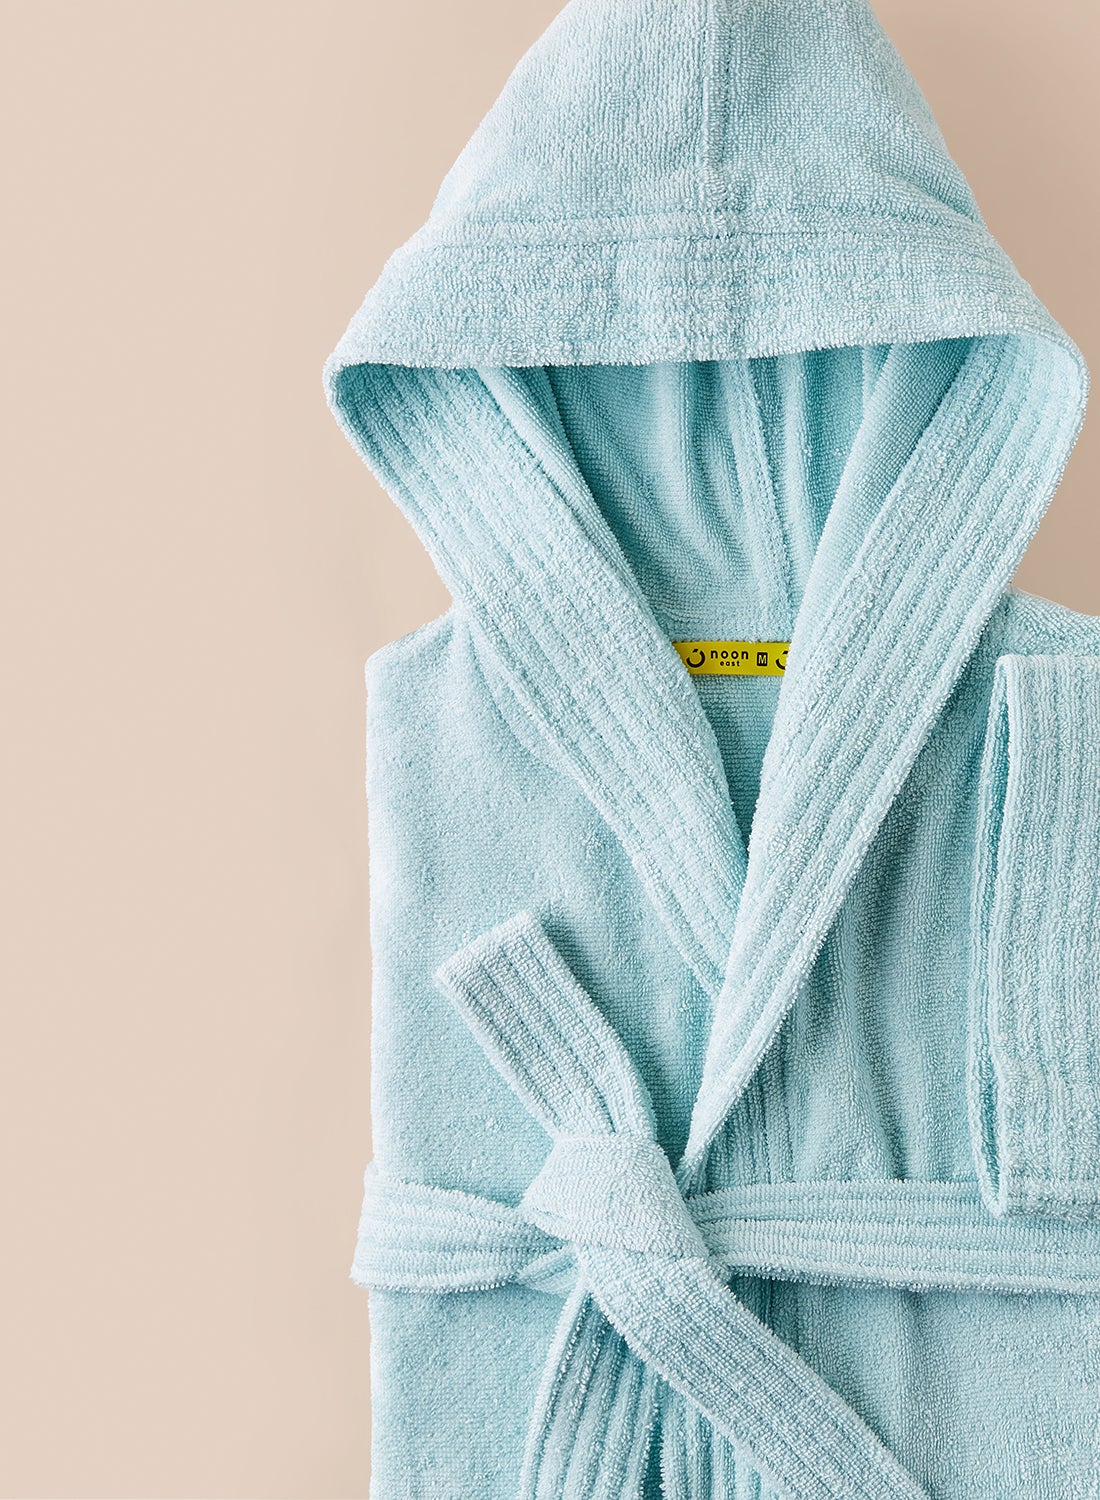 Bathrobe - 300 GSM 100% Cotton Terry Extremely Absorbent, Everyday Use - Shawl Collar & Pocket - Pastel Green Color - 1 Piece 